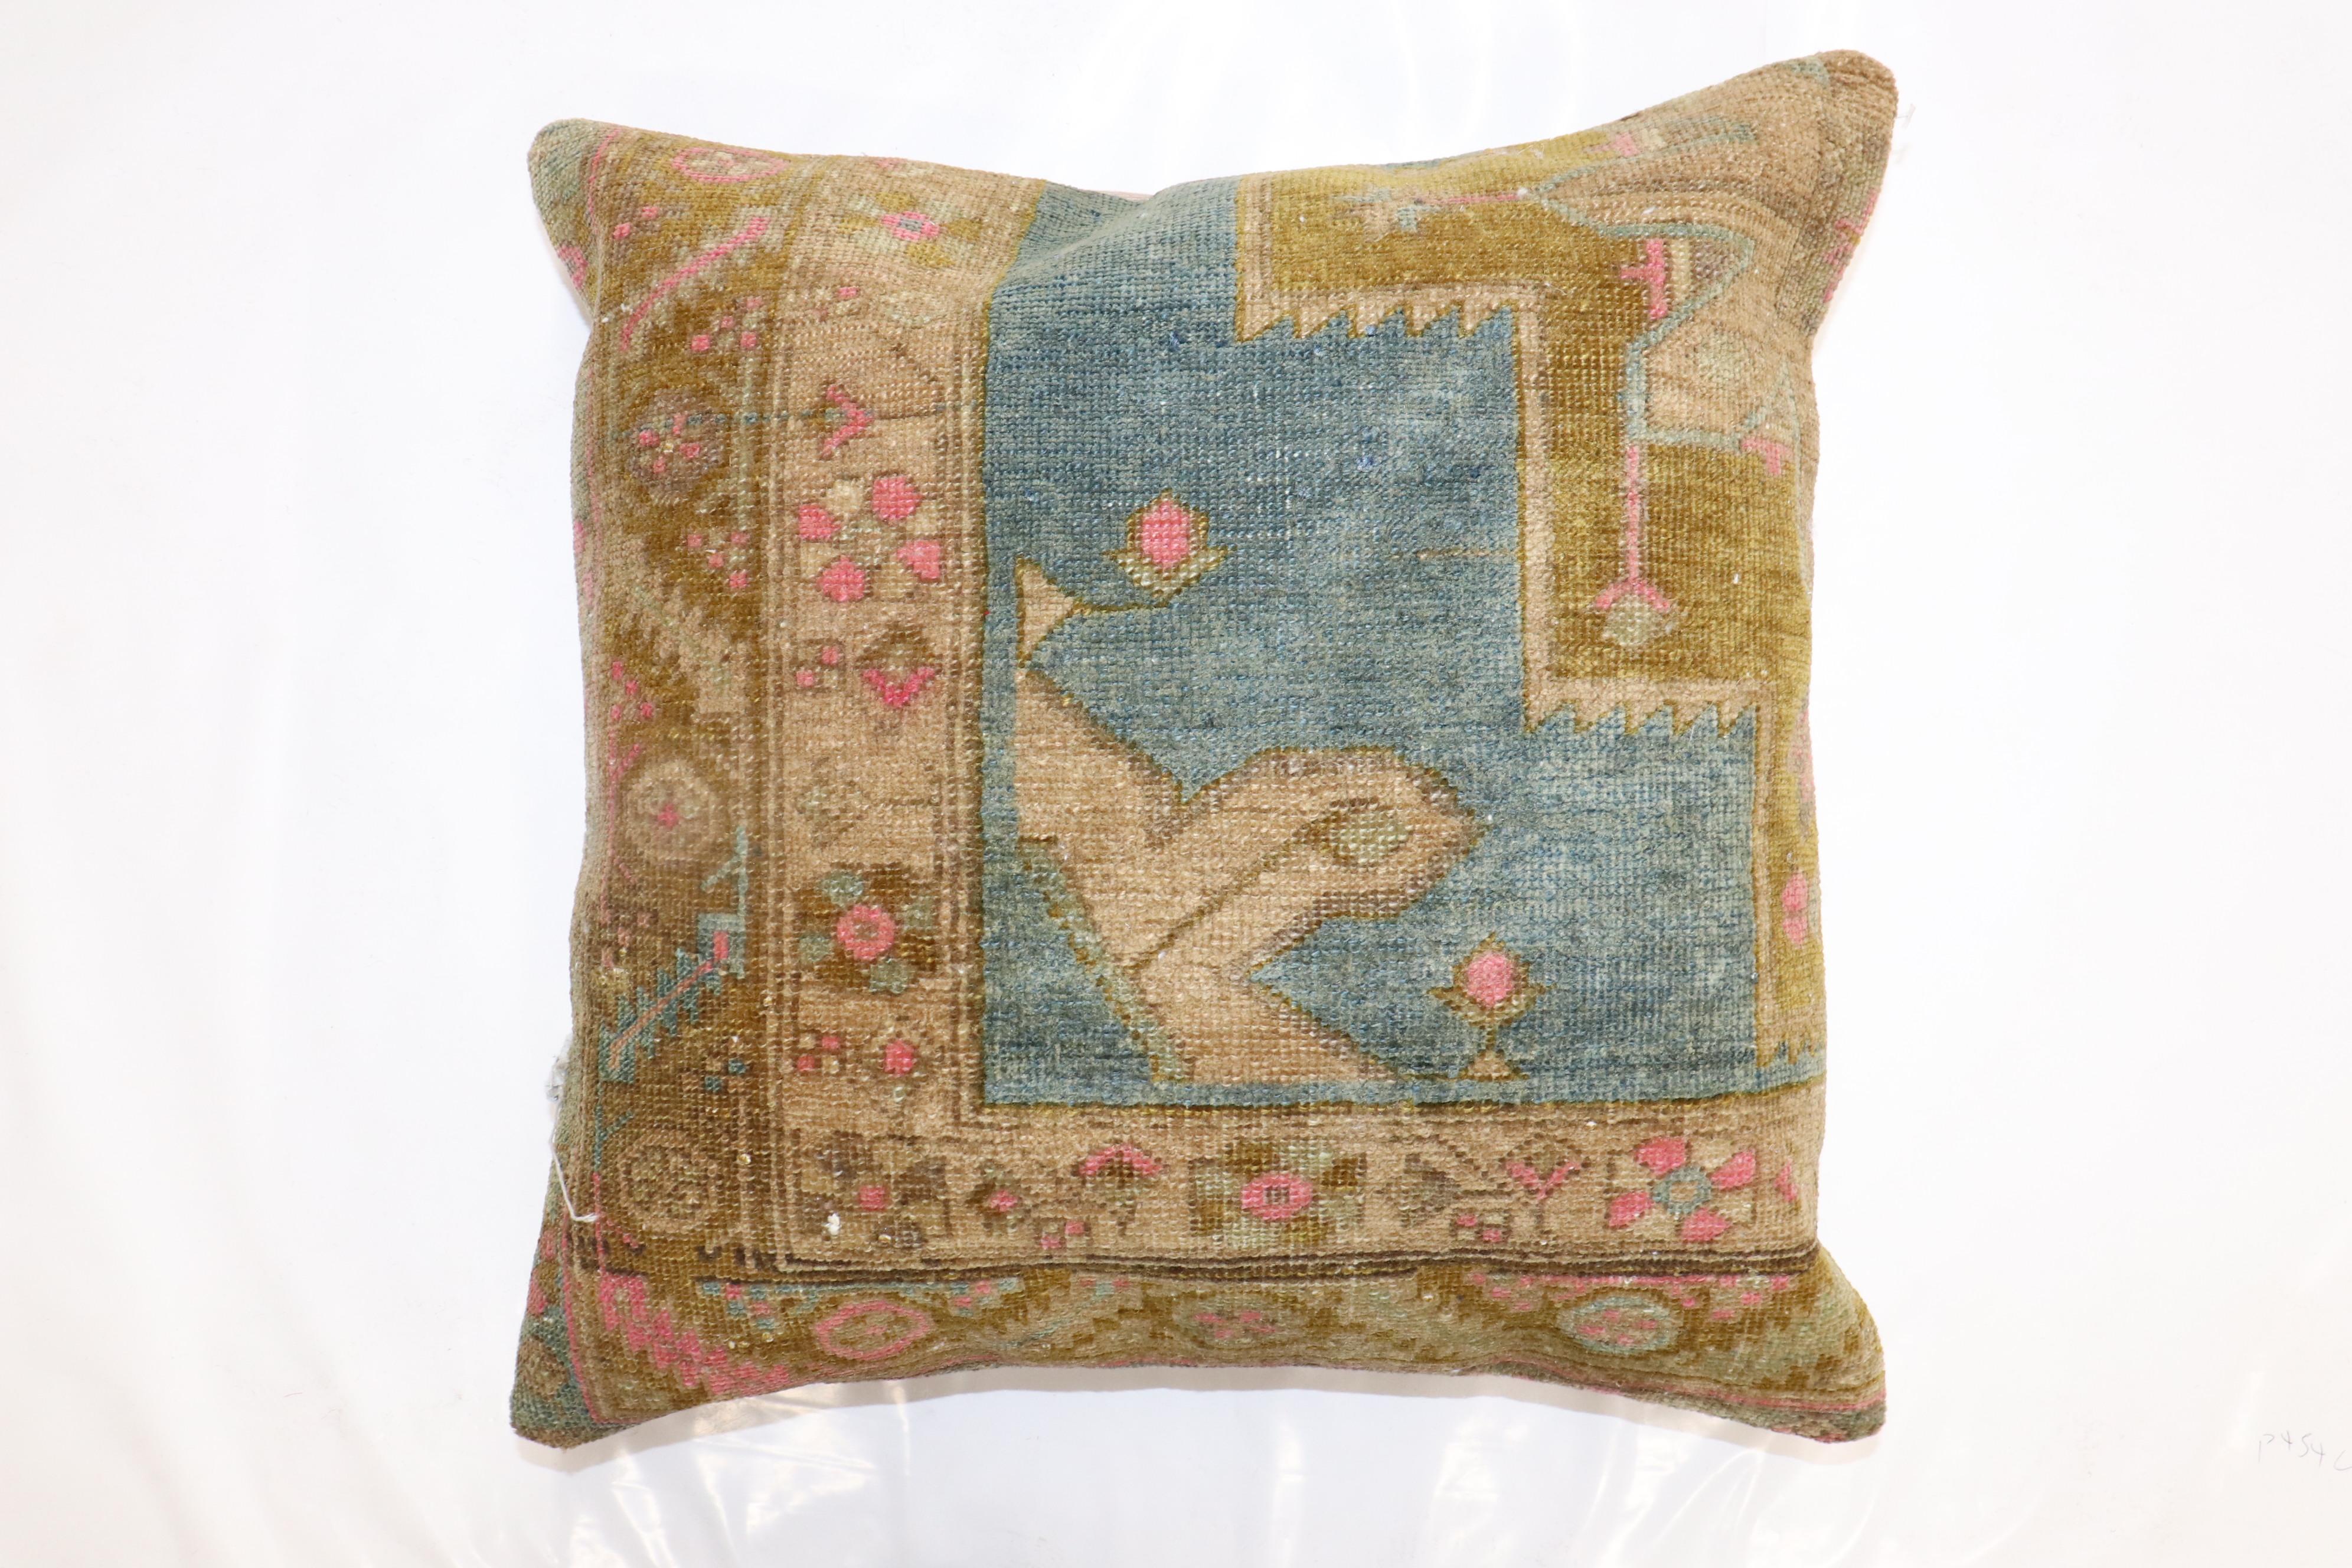 Pillow made from a Caucasian Karabagh rug. Polyfill and zipper closure included

Measures: 20'' x 20''.